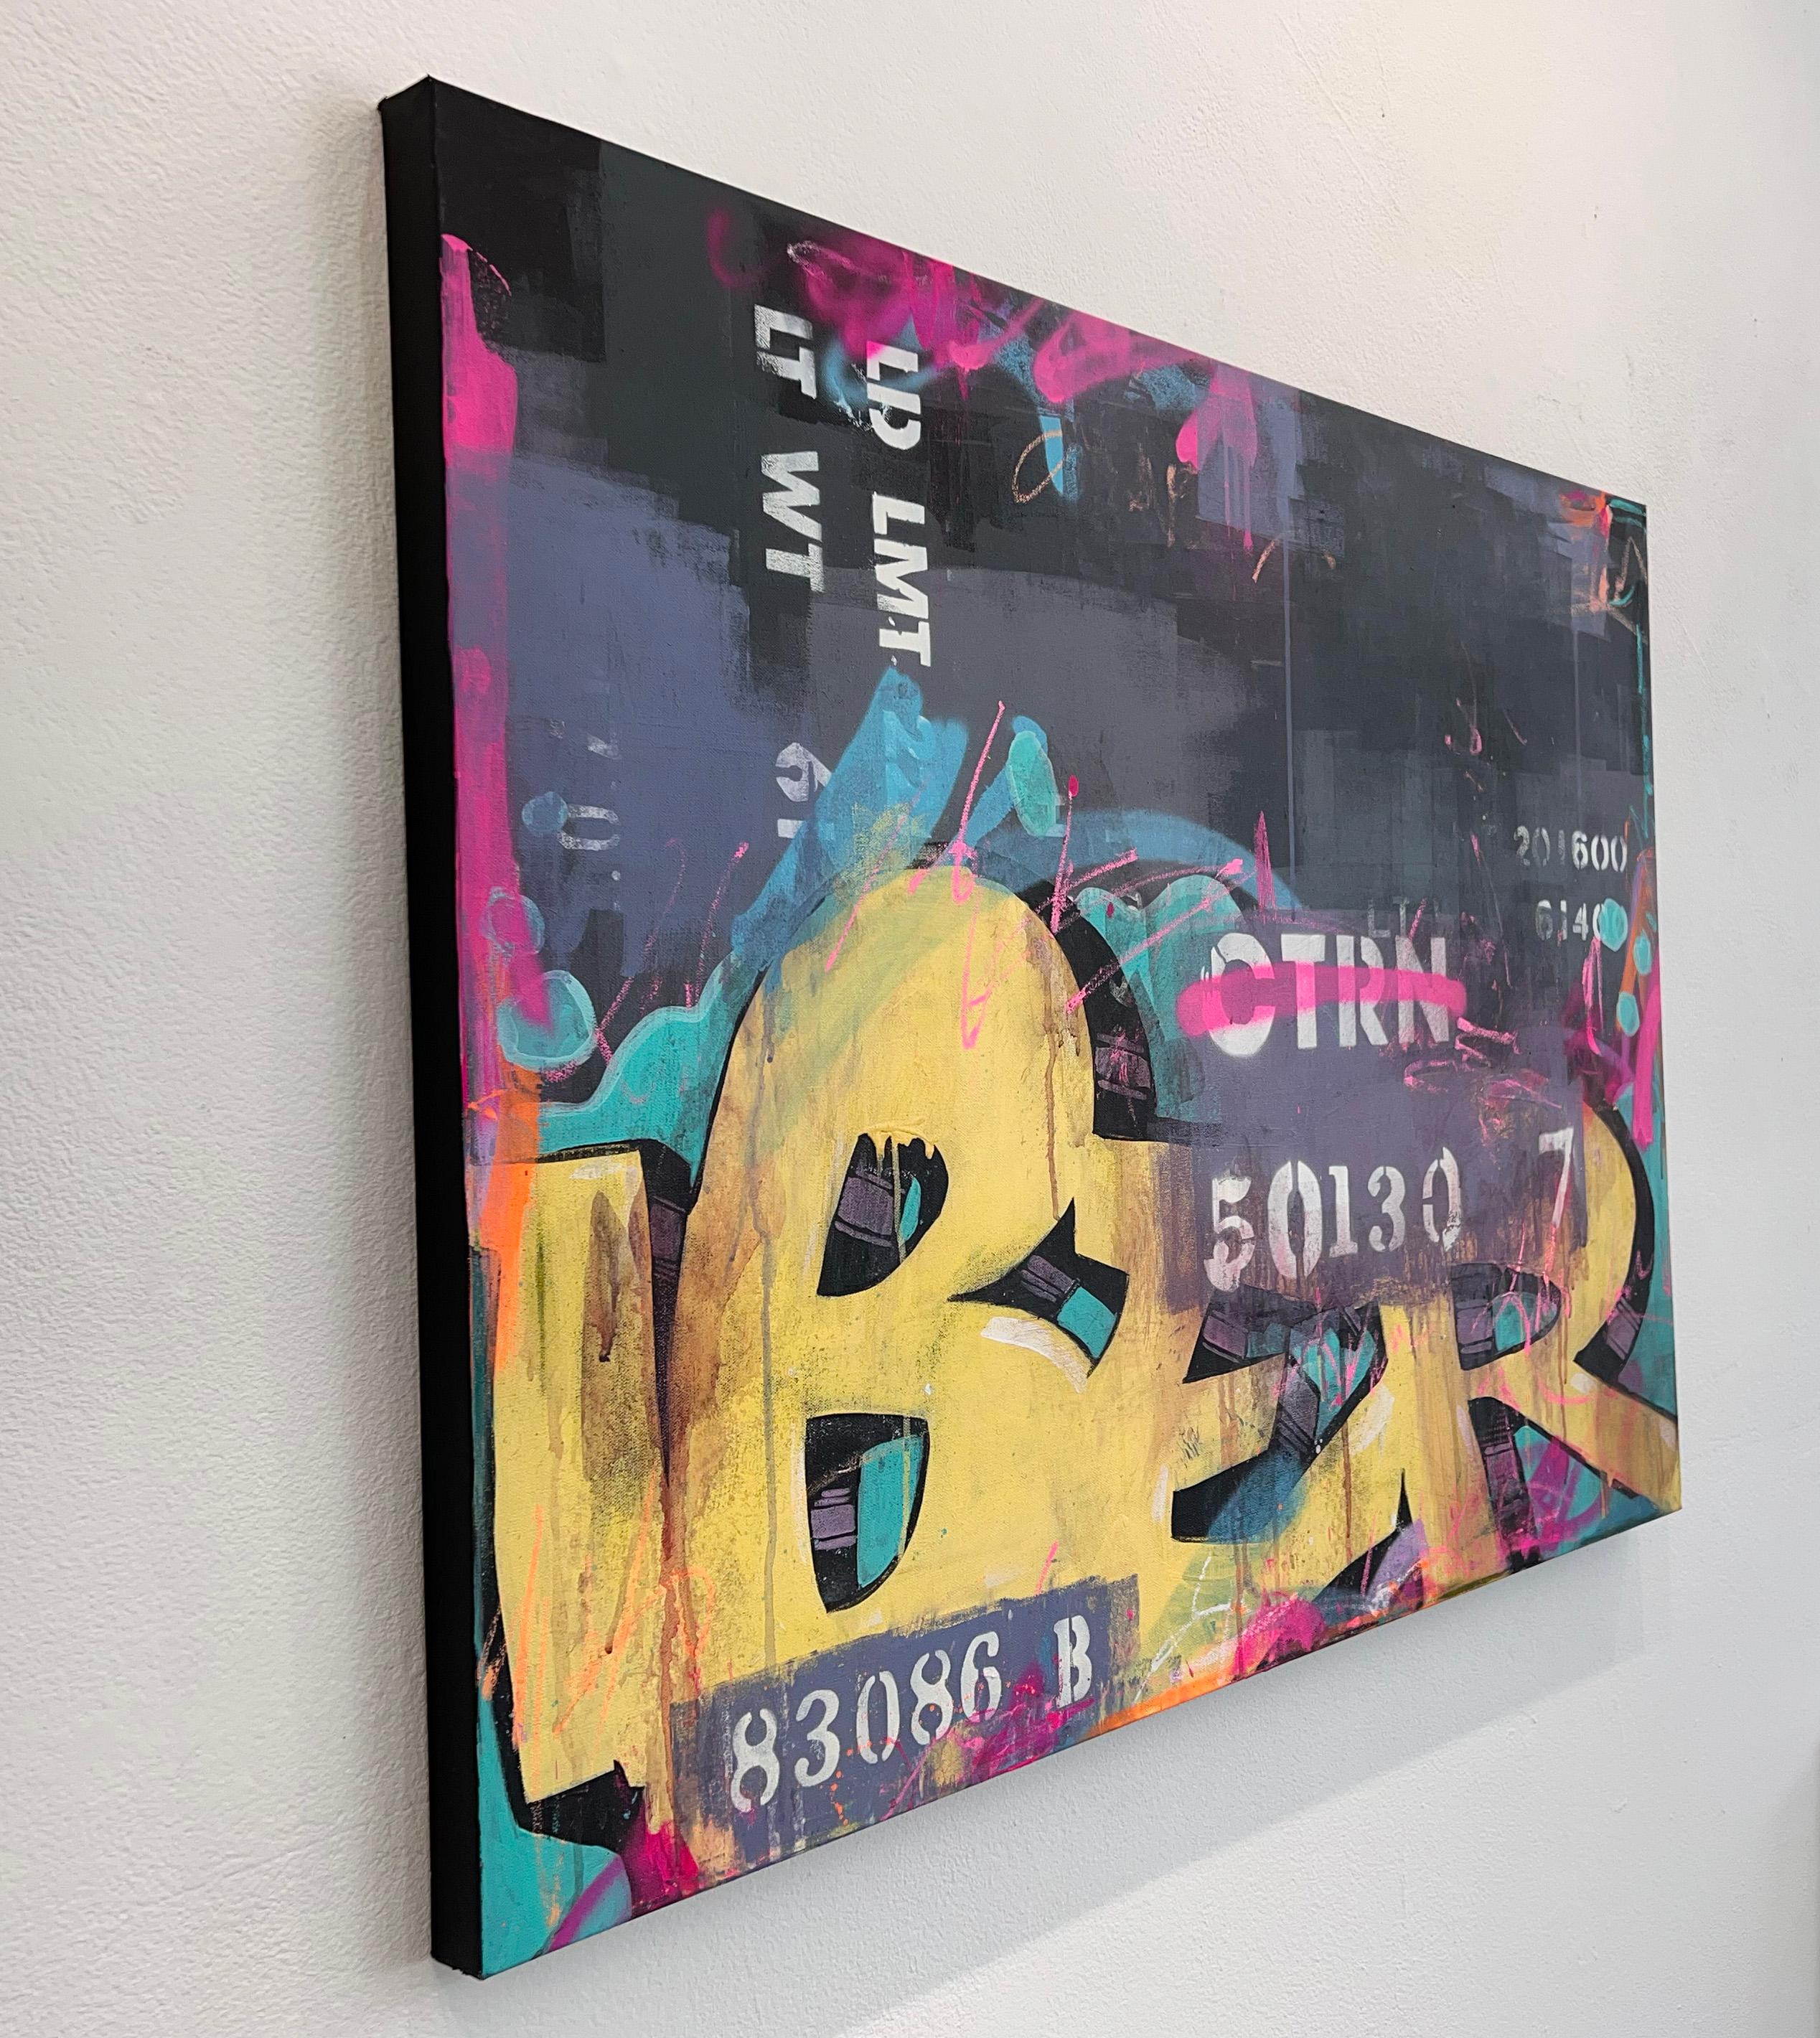 'Derailed' is an urban graffiti painting by urban impressionist painter Steve Javiel. The piece incorporates a blend of acrylic paints, solid markers, and spray paints on a canvas, measuring 30 x 40 x 1.5 inches in size.